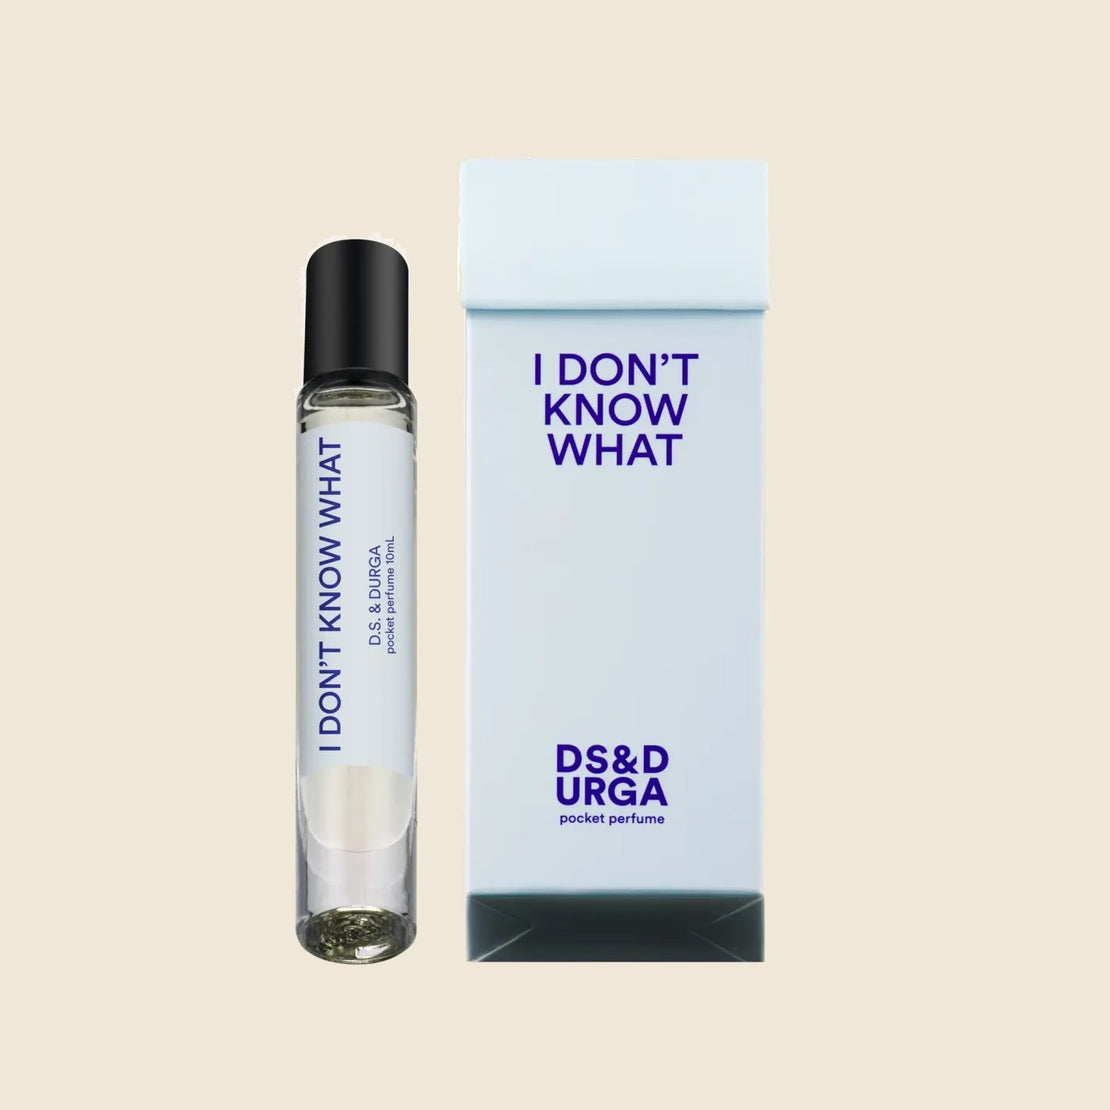 D.S. & Durga Pocket Perfume - I Don't Know What